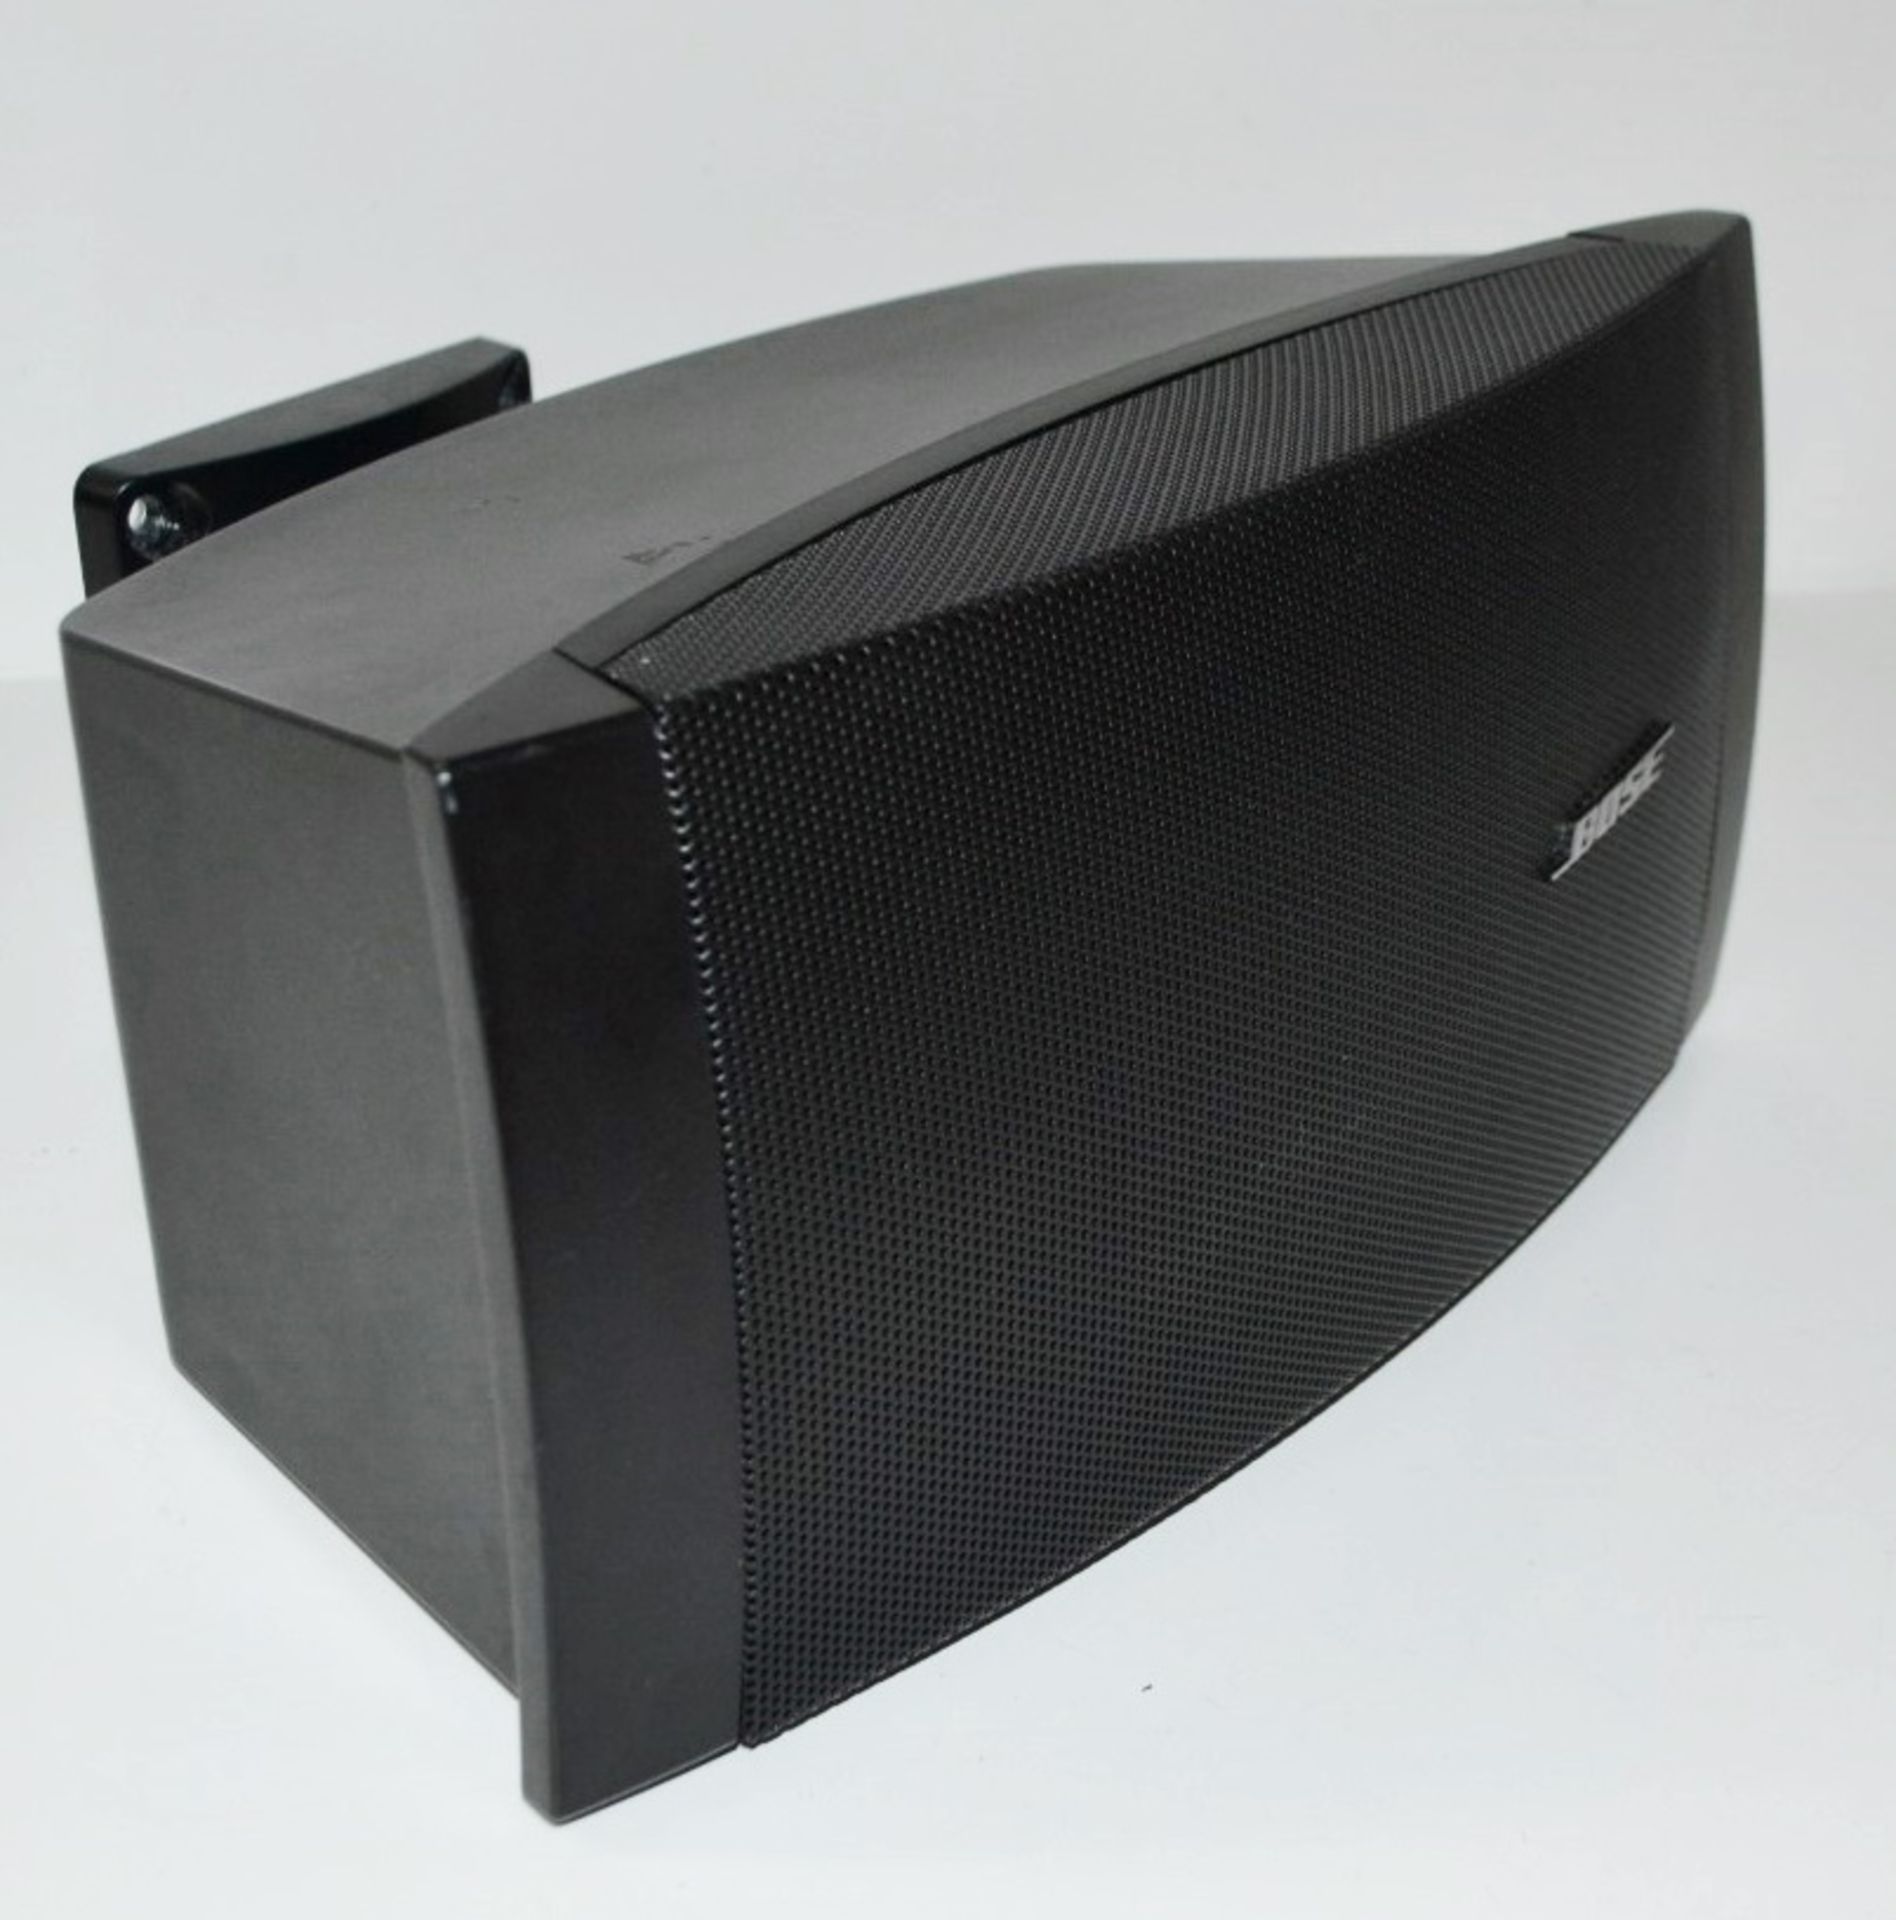 4 x Bose FreeSpace DS 40SE Loudspeakers - Dimensions: 15.9 x 32.6 x 17.5 cm - Recently Removed - Image 2 of 5